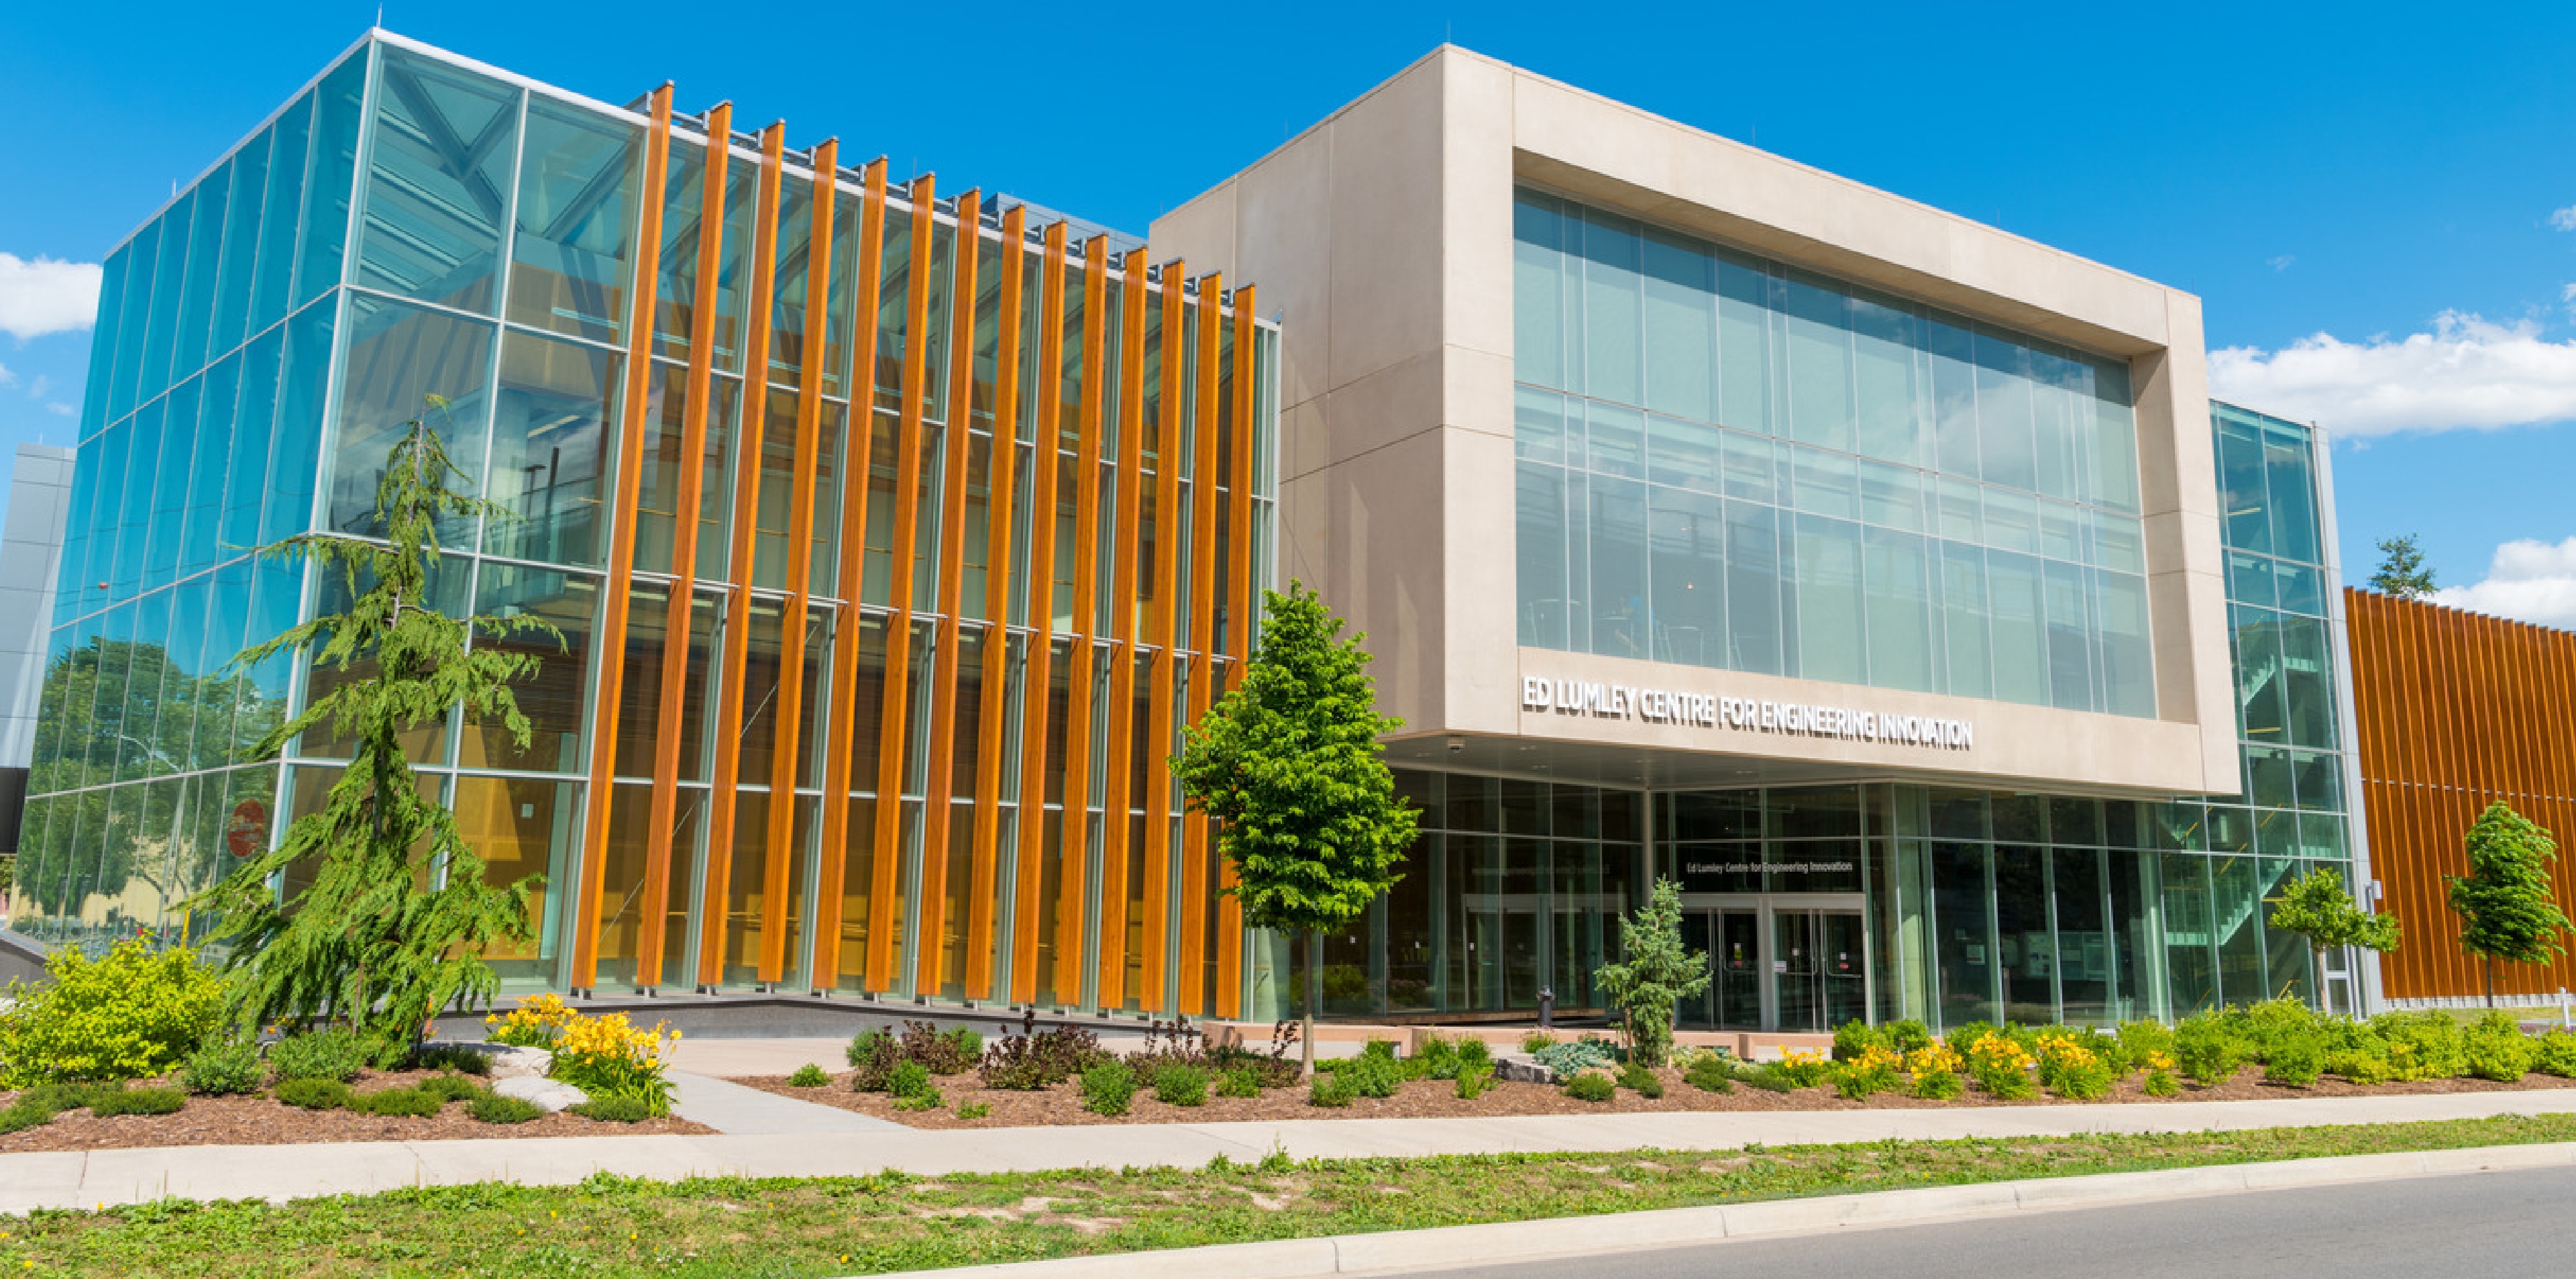 photo of the engineering building at the University of Windsor